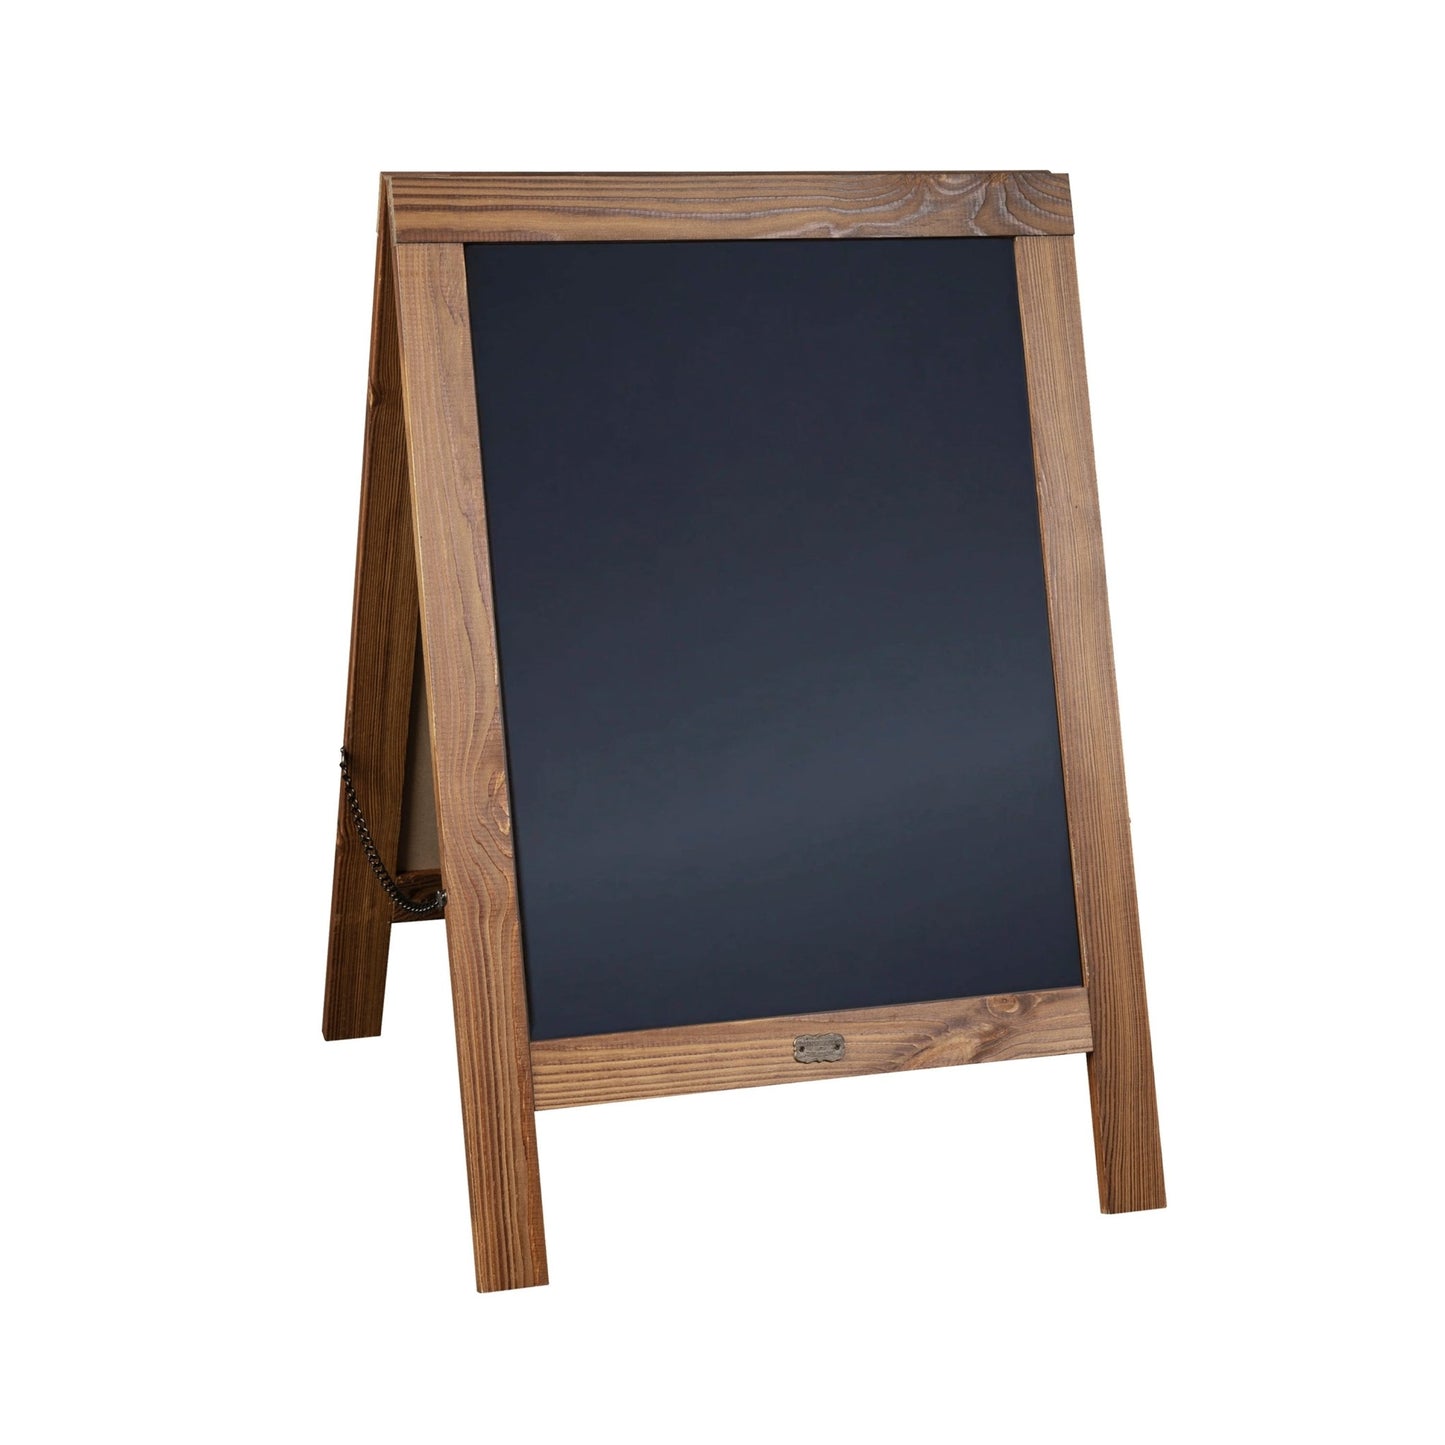 Canterbury 30" x 20" Vintage Wooden A-Frame Magnetic Indoor/Outdoor Chalkboard Sign, Freestanding Double Sided Extra Large Message Board - SchoolOutlet